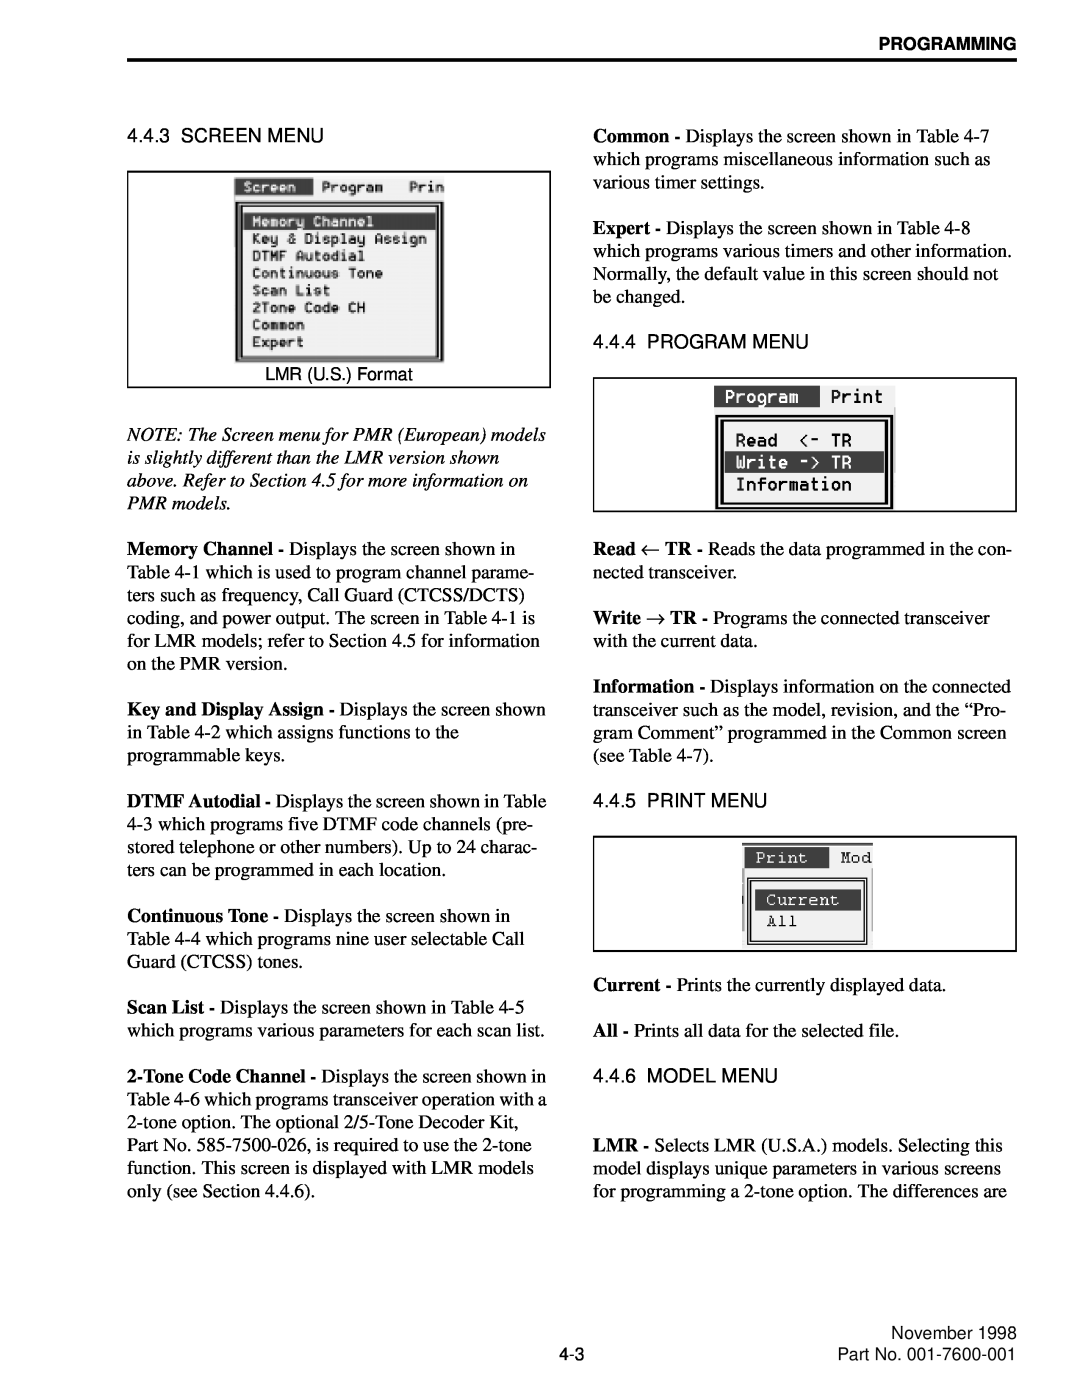 EFJohnson 764X, 761X service manual Current - Prints the currently displayed data 